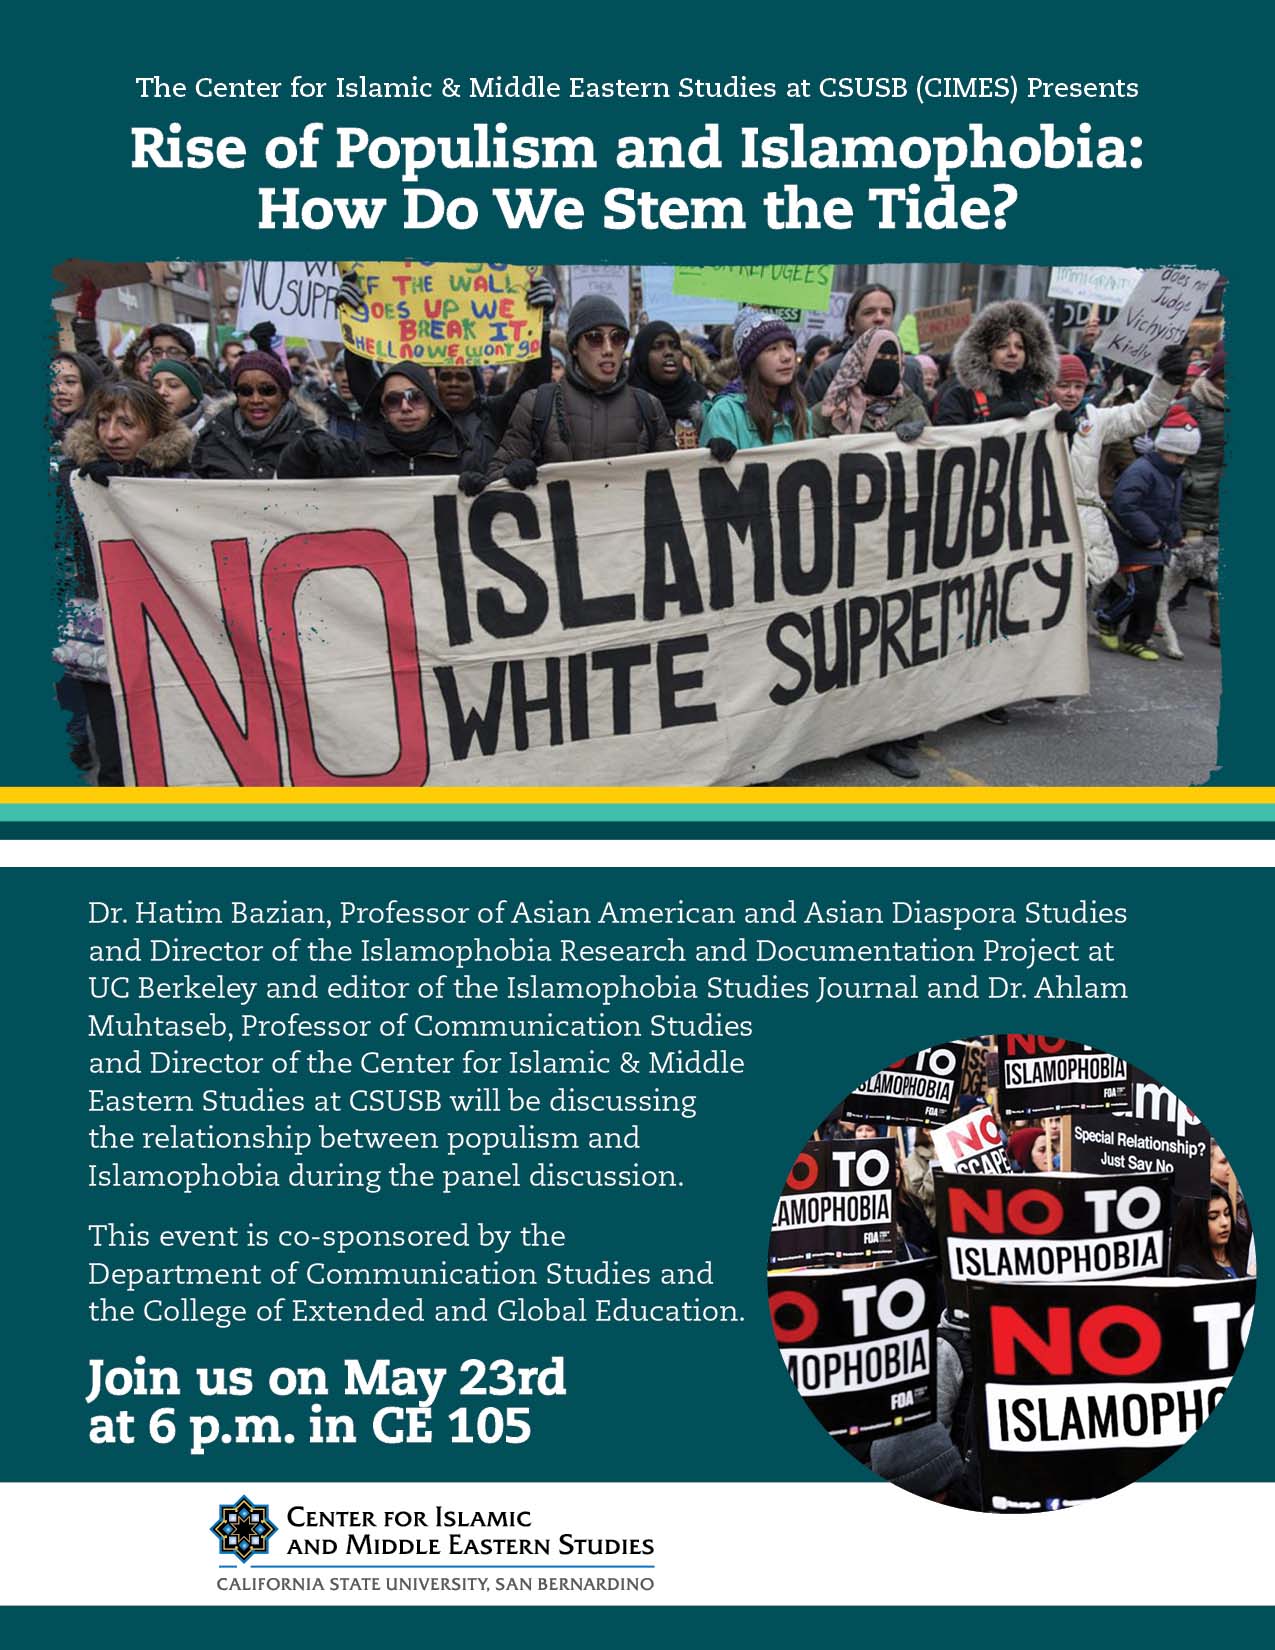 The rise of populism and Islamophobia will be the topic of discussion when the Center for Islamic and Middle Eastern Studies at Cal State San Bernardino hosts a panel discussion, “Rise of Populism and Islamophobia: How Can We Stem the Tide?” on Thursday, 